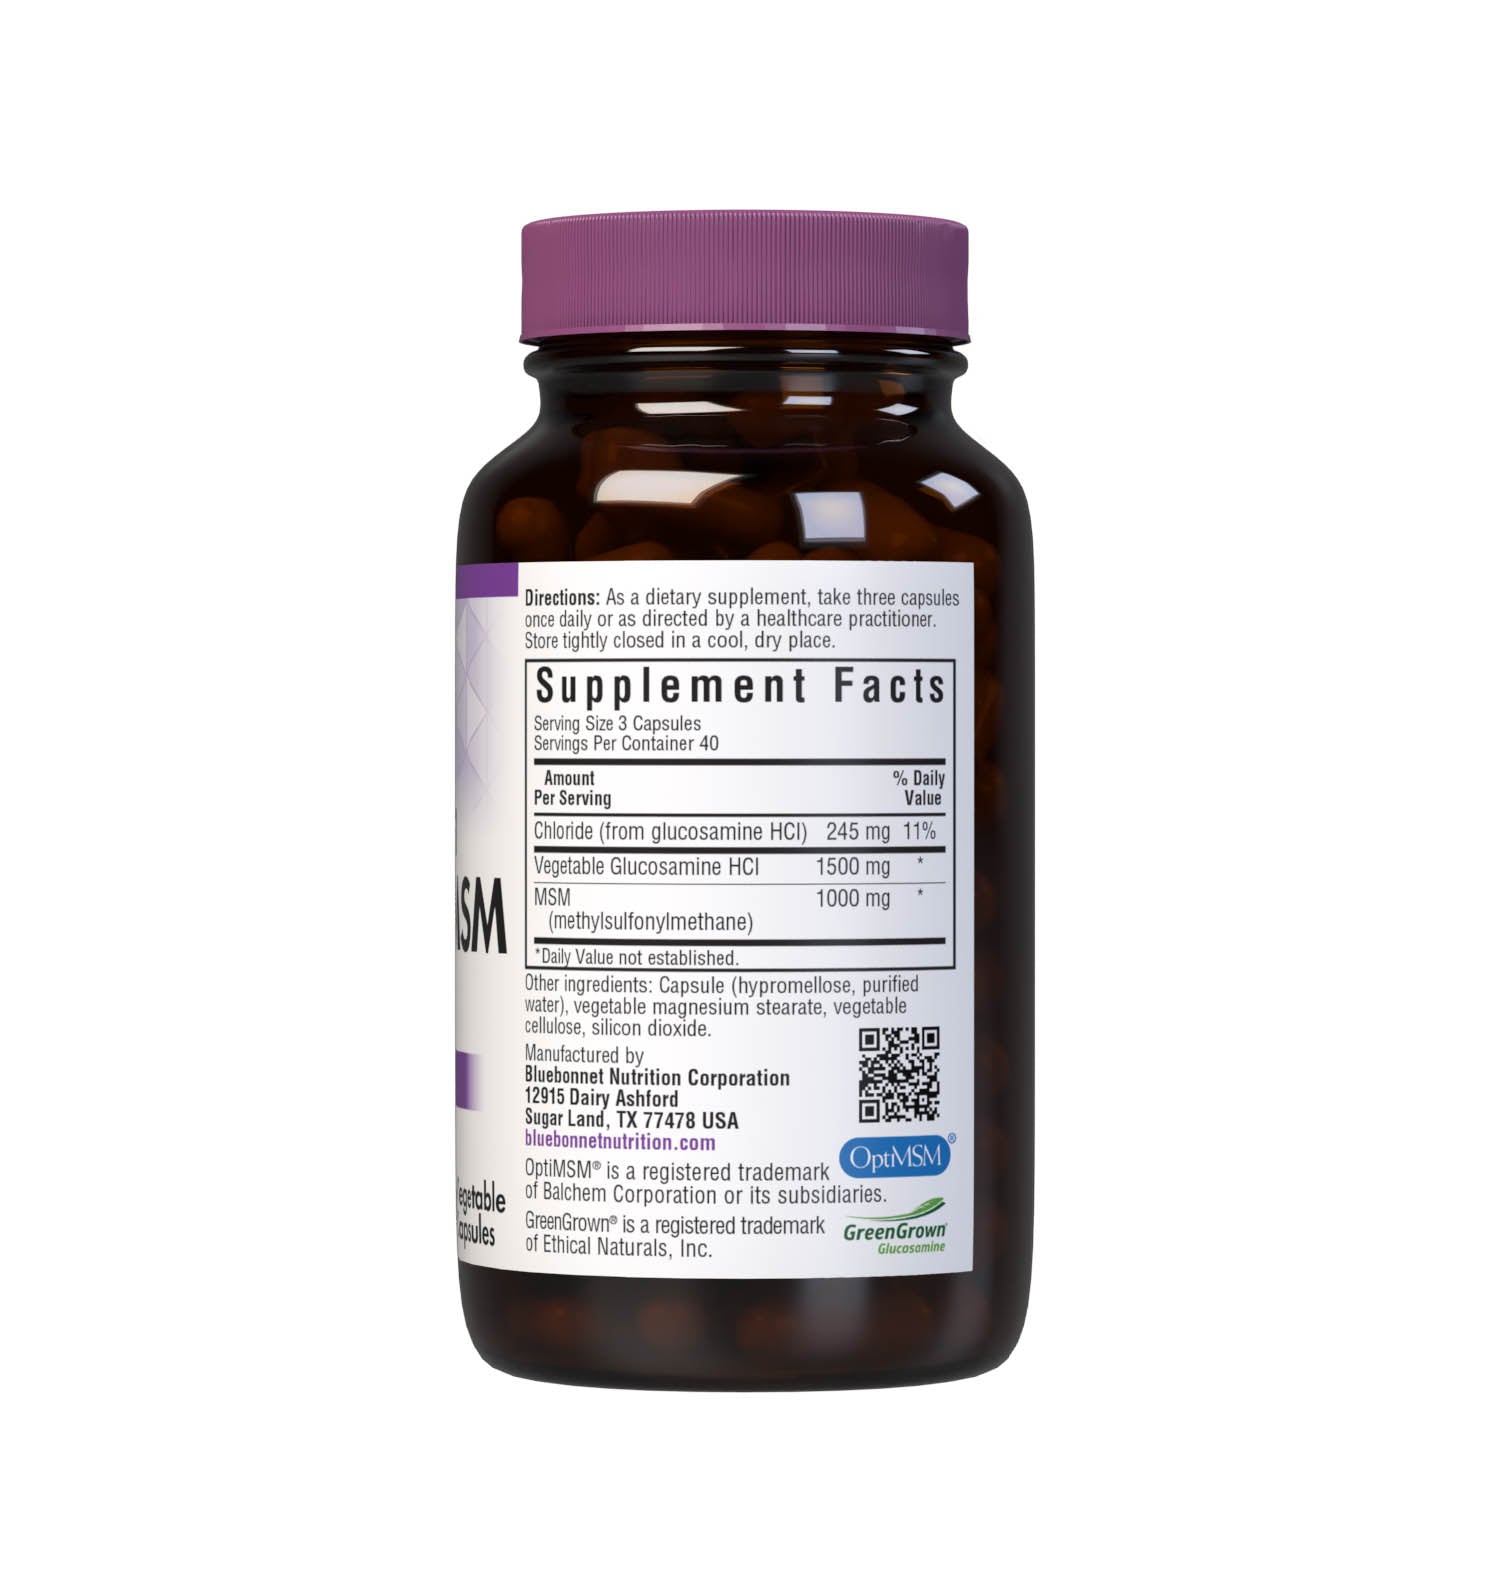 Bluebonnet’s Vegetarian Glucosamine MSM (Shellfish-Free) 120 Vegetable Capsules are formulated with a complementary, vegetarian blend of glucosamine hydrochloride known as GreenGrown and patented OptiMSM for optimal joint health. Supplement facts panel. #size_120 count